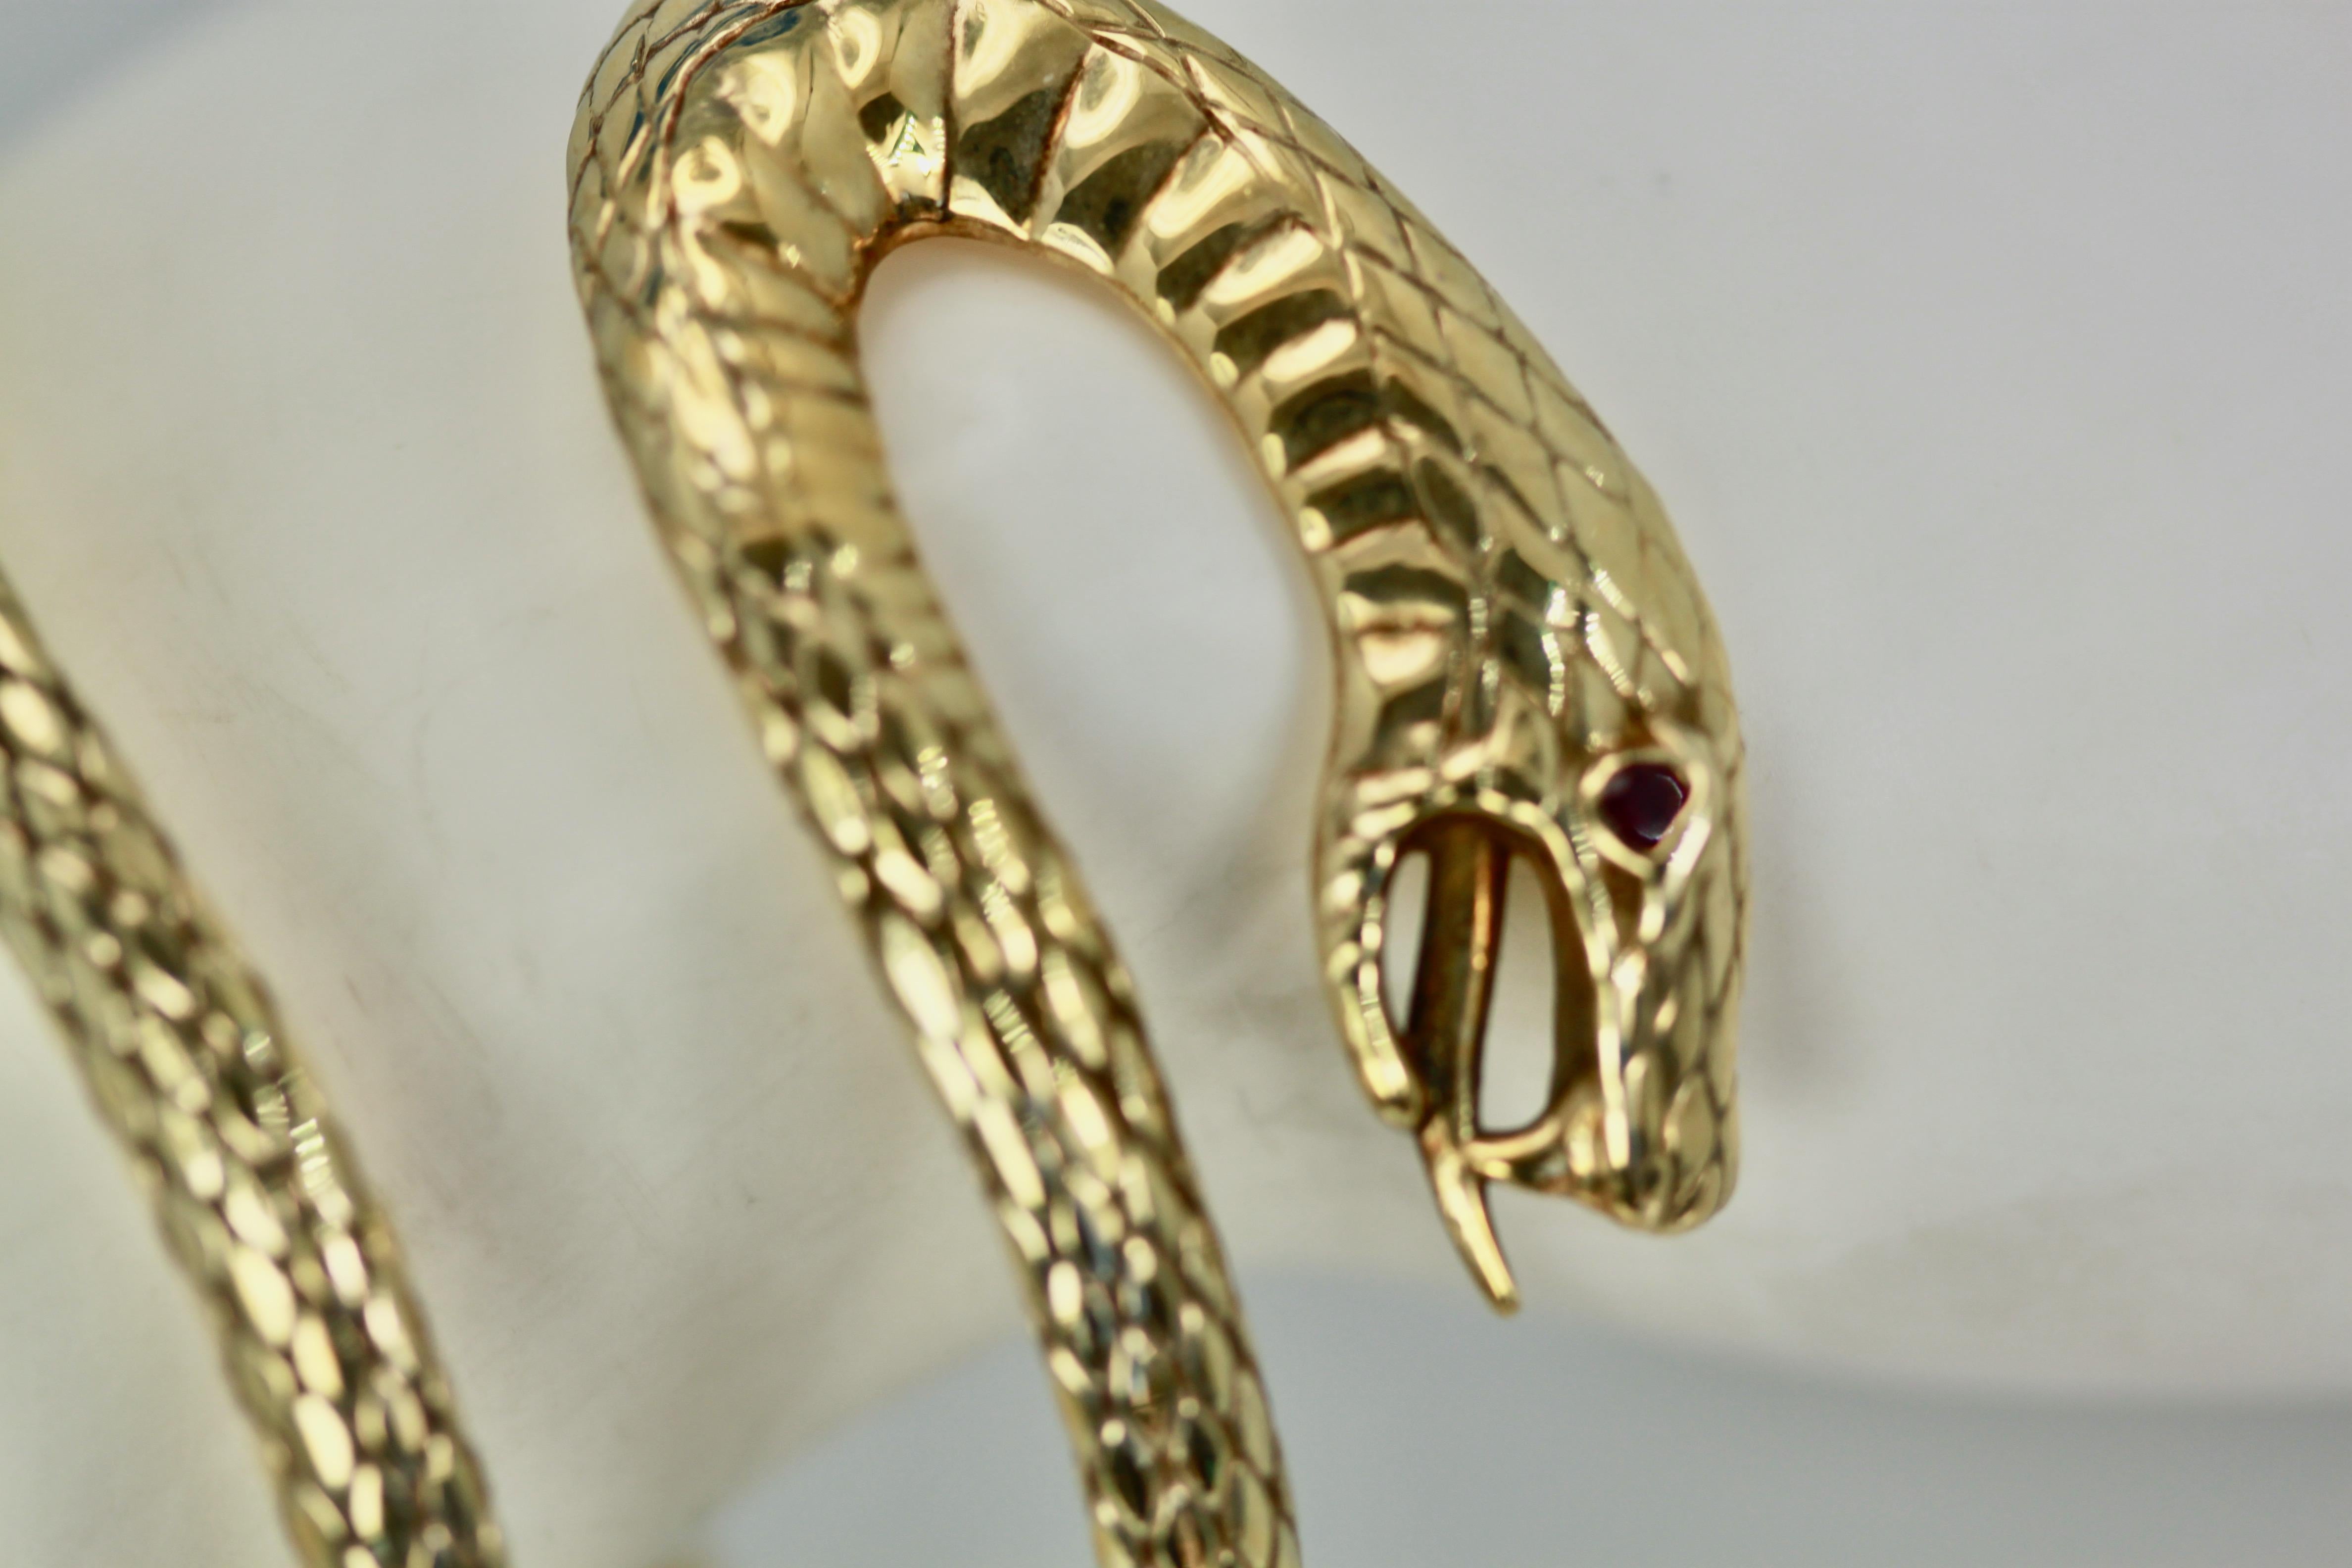 This amazing snake bracelet is completely detailed and engraved. It is attributed to Stephen Webster. Because of its unusual shape it fits many wrist sizes and is truly unique.  This snake has a ruby eye and fangs and tongue and wraps around the